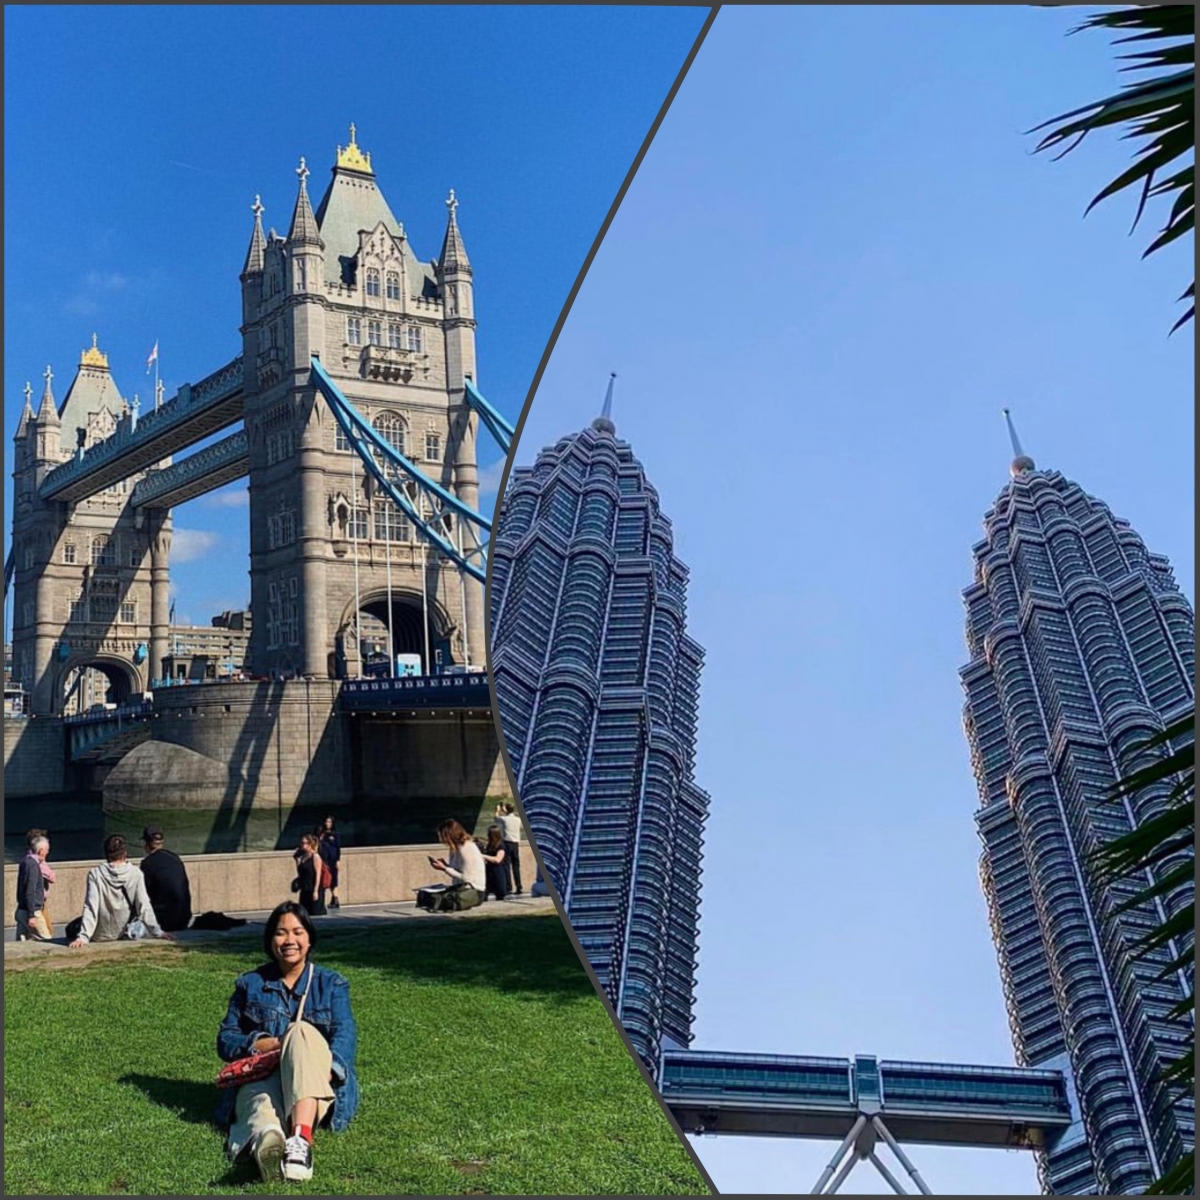 Time difference between malaysia and uk